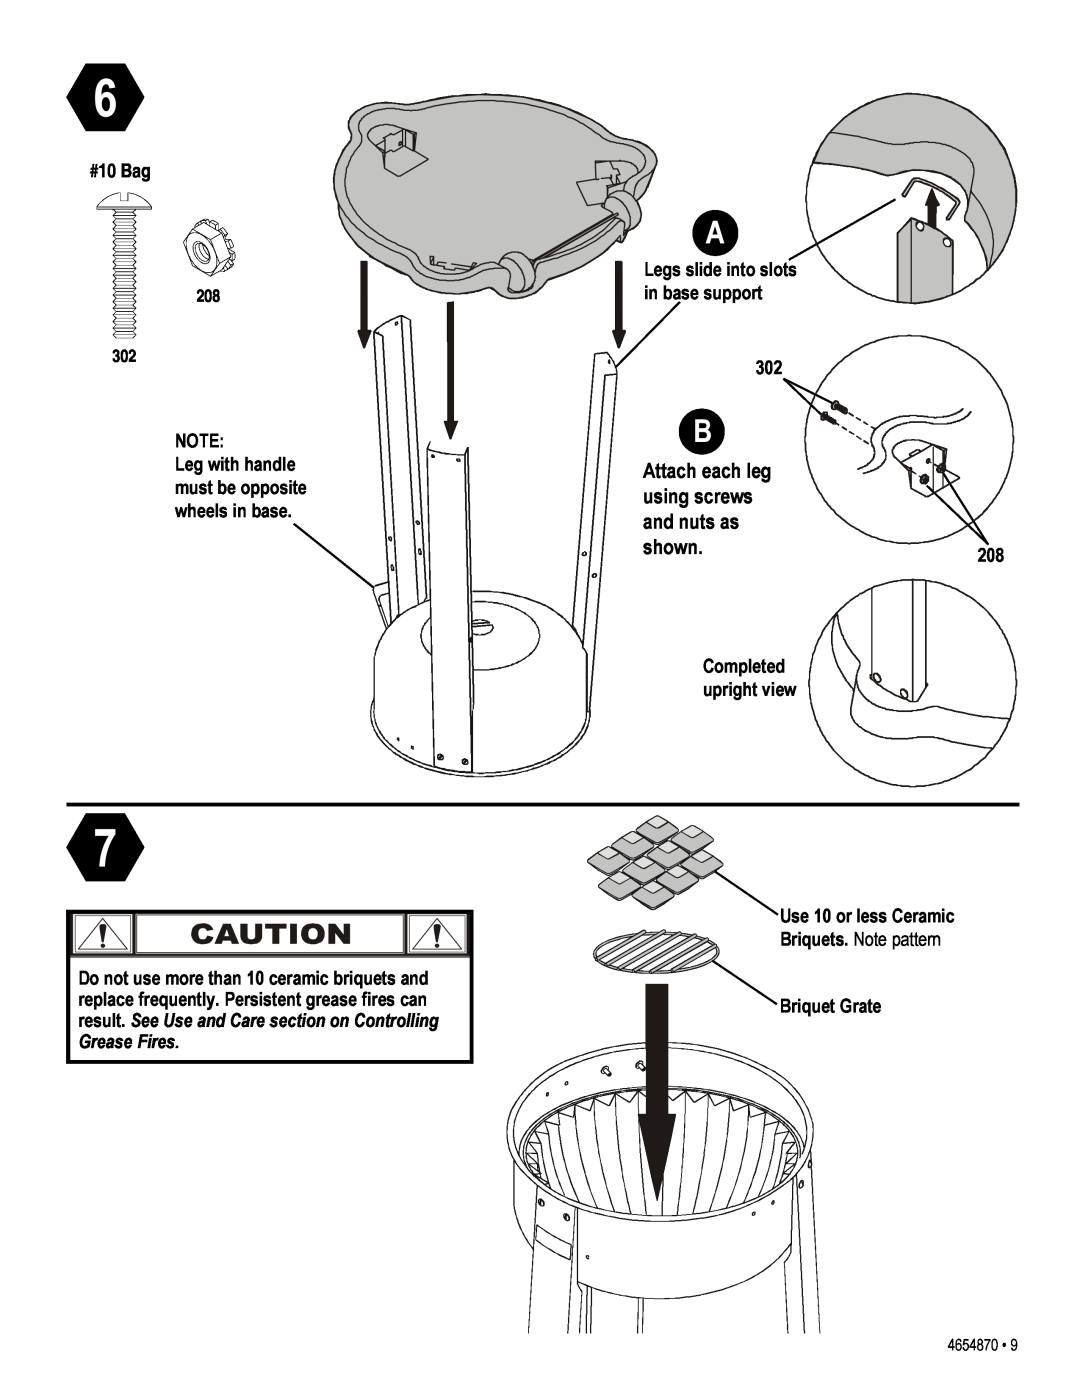 Char-Broil 4654870 and nuts as shown.208, #10 Bag, Attach each leg using screws, Legs slide into slots in base support 